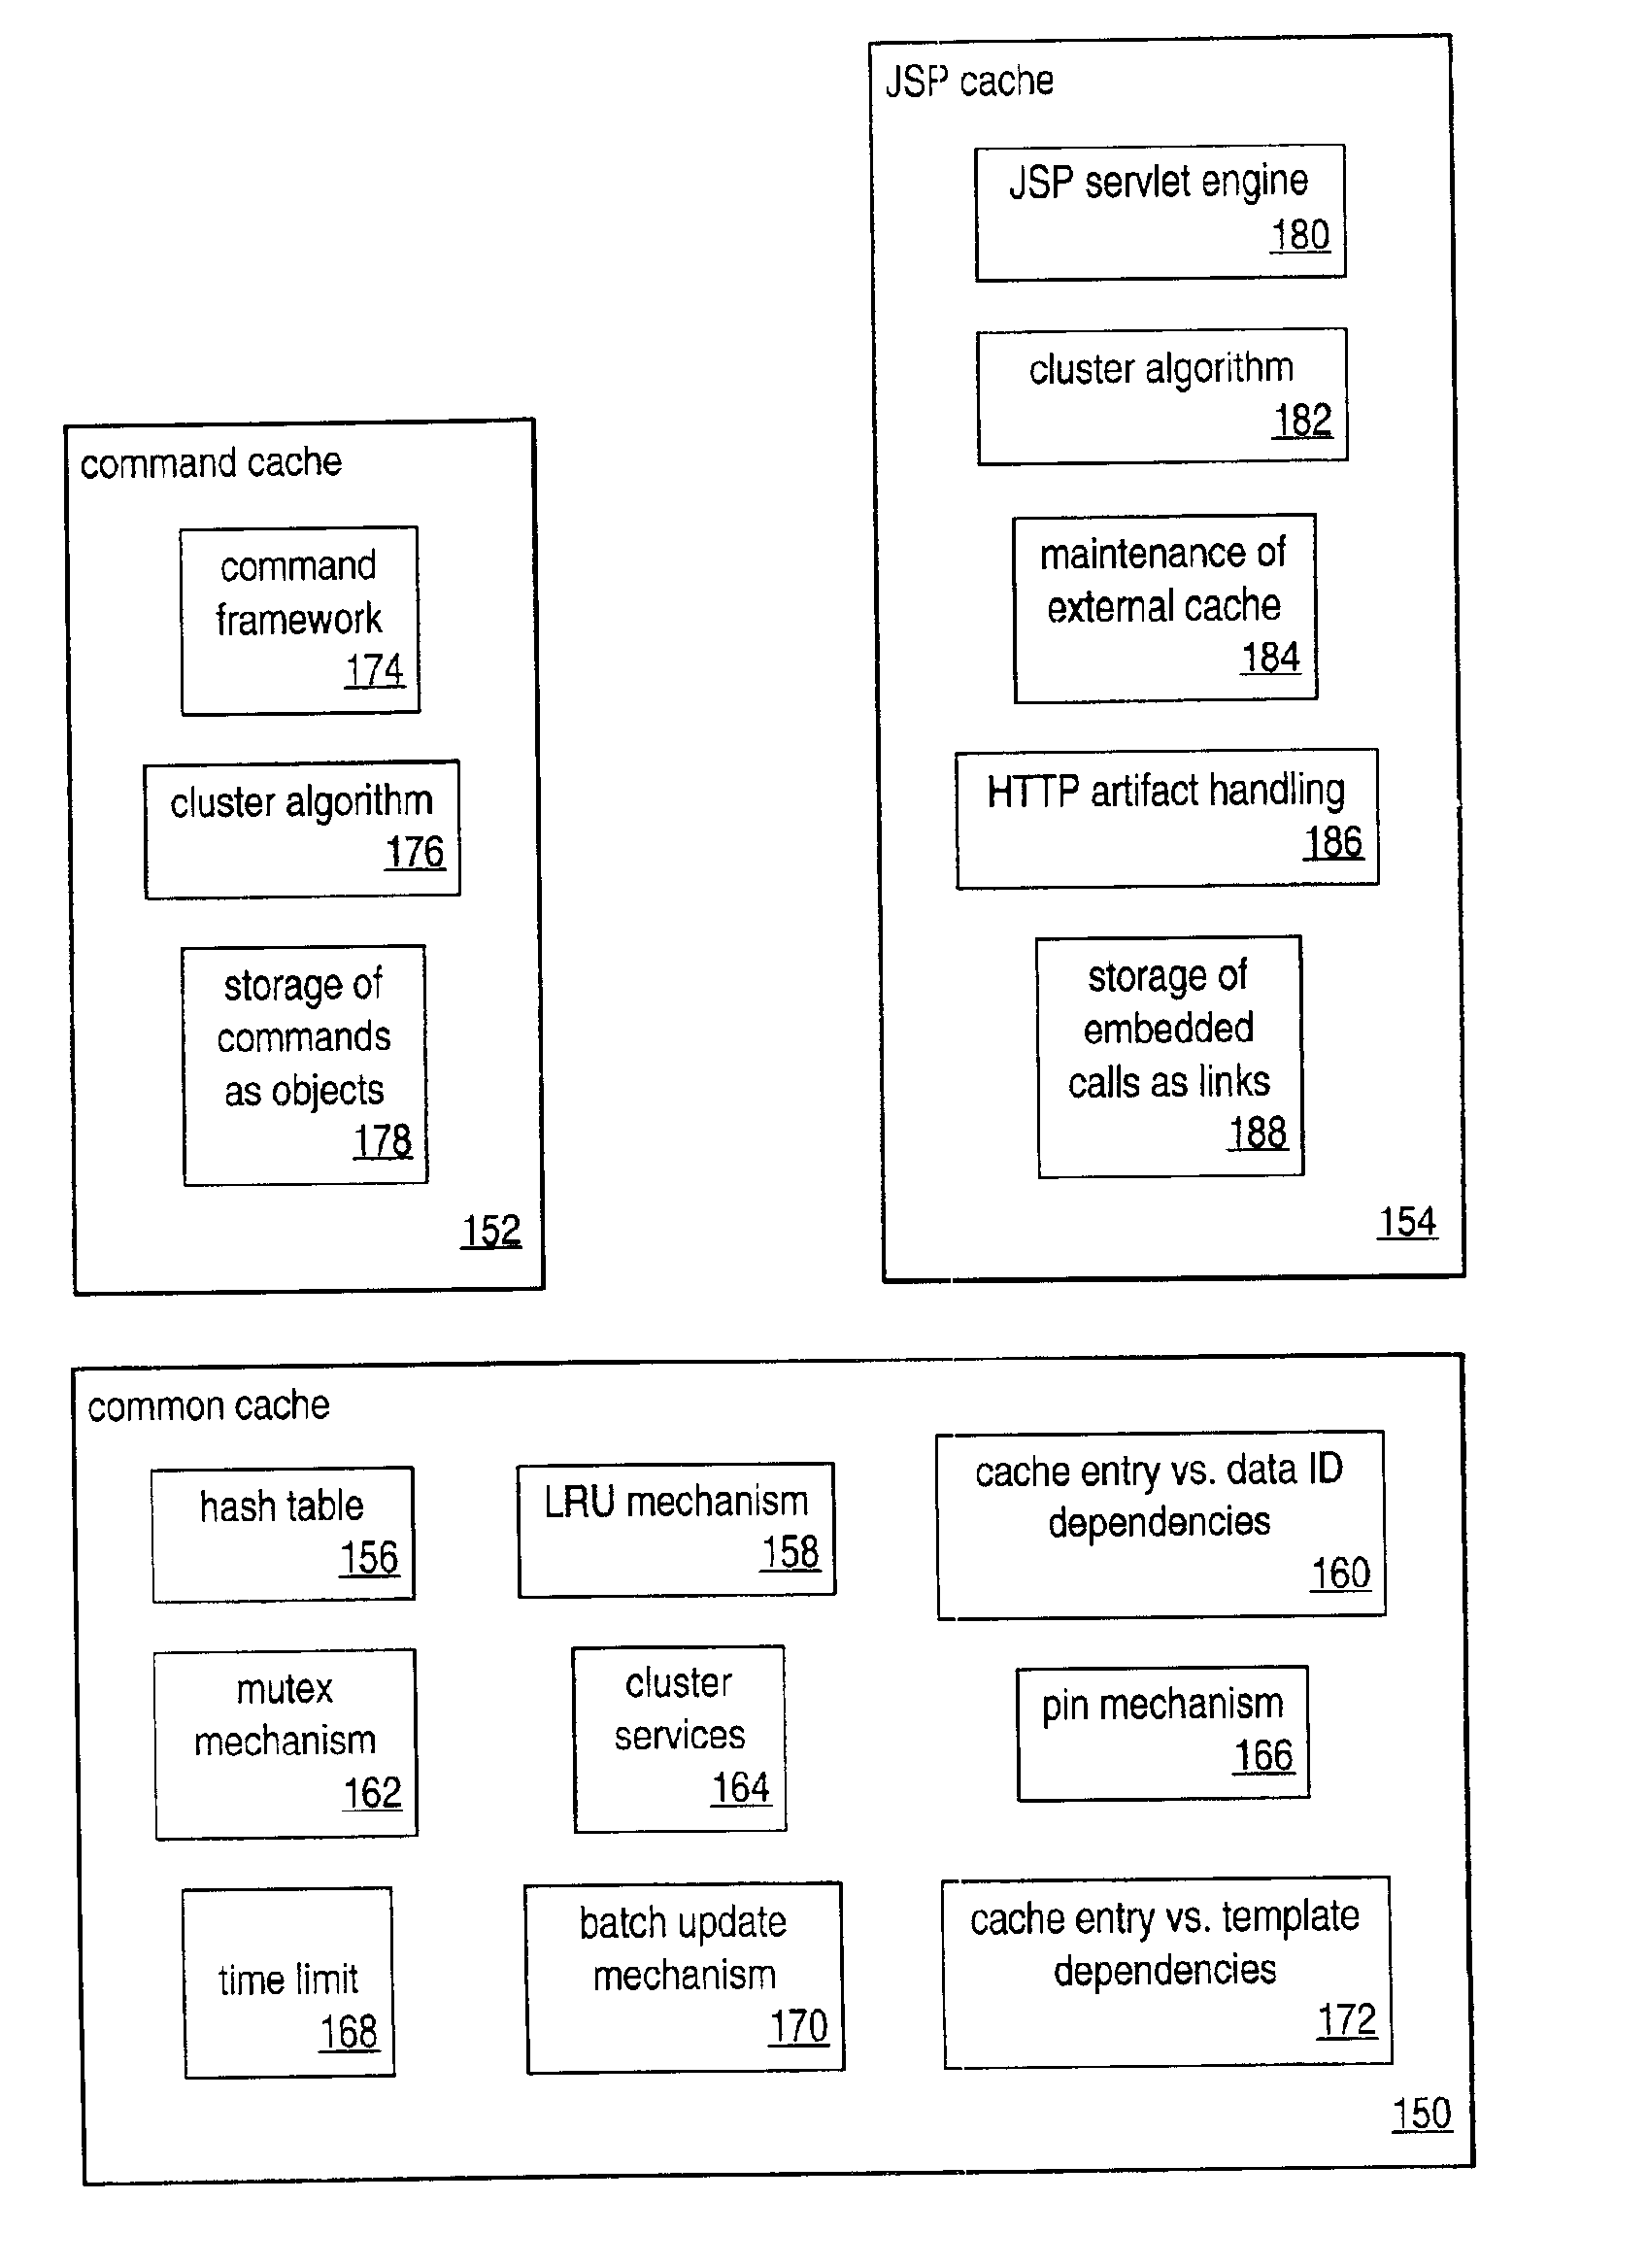 Integrated JSP and command cache for web applications with dynamic content